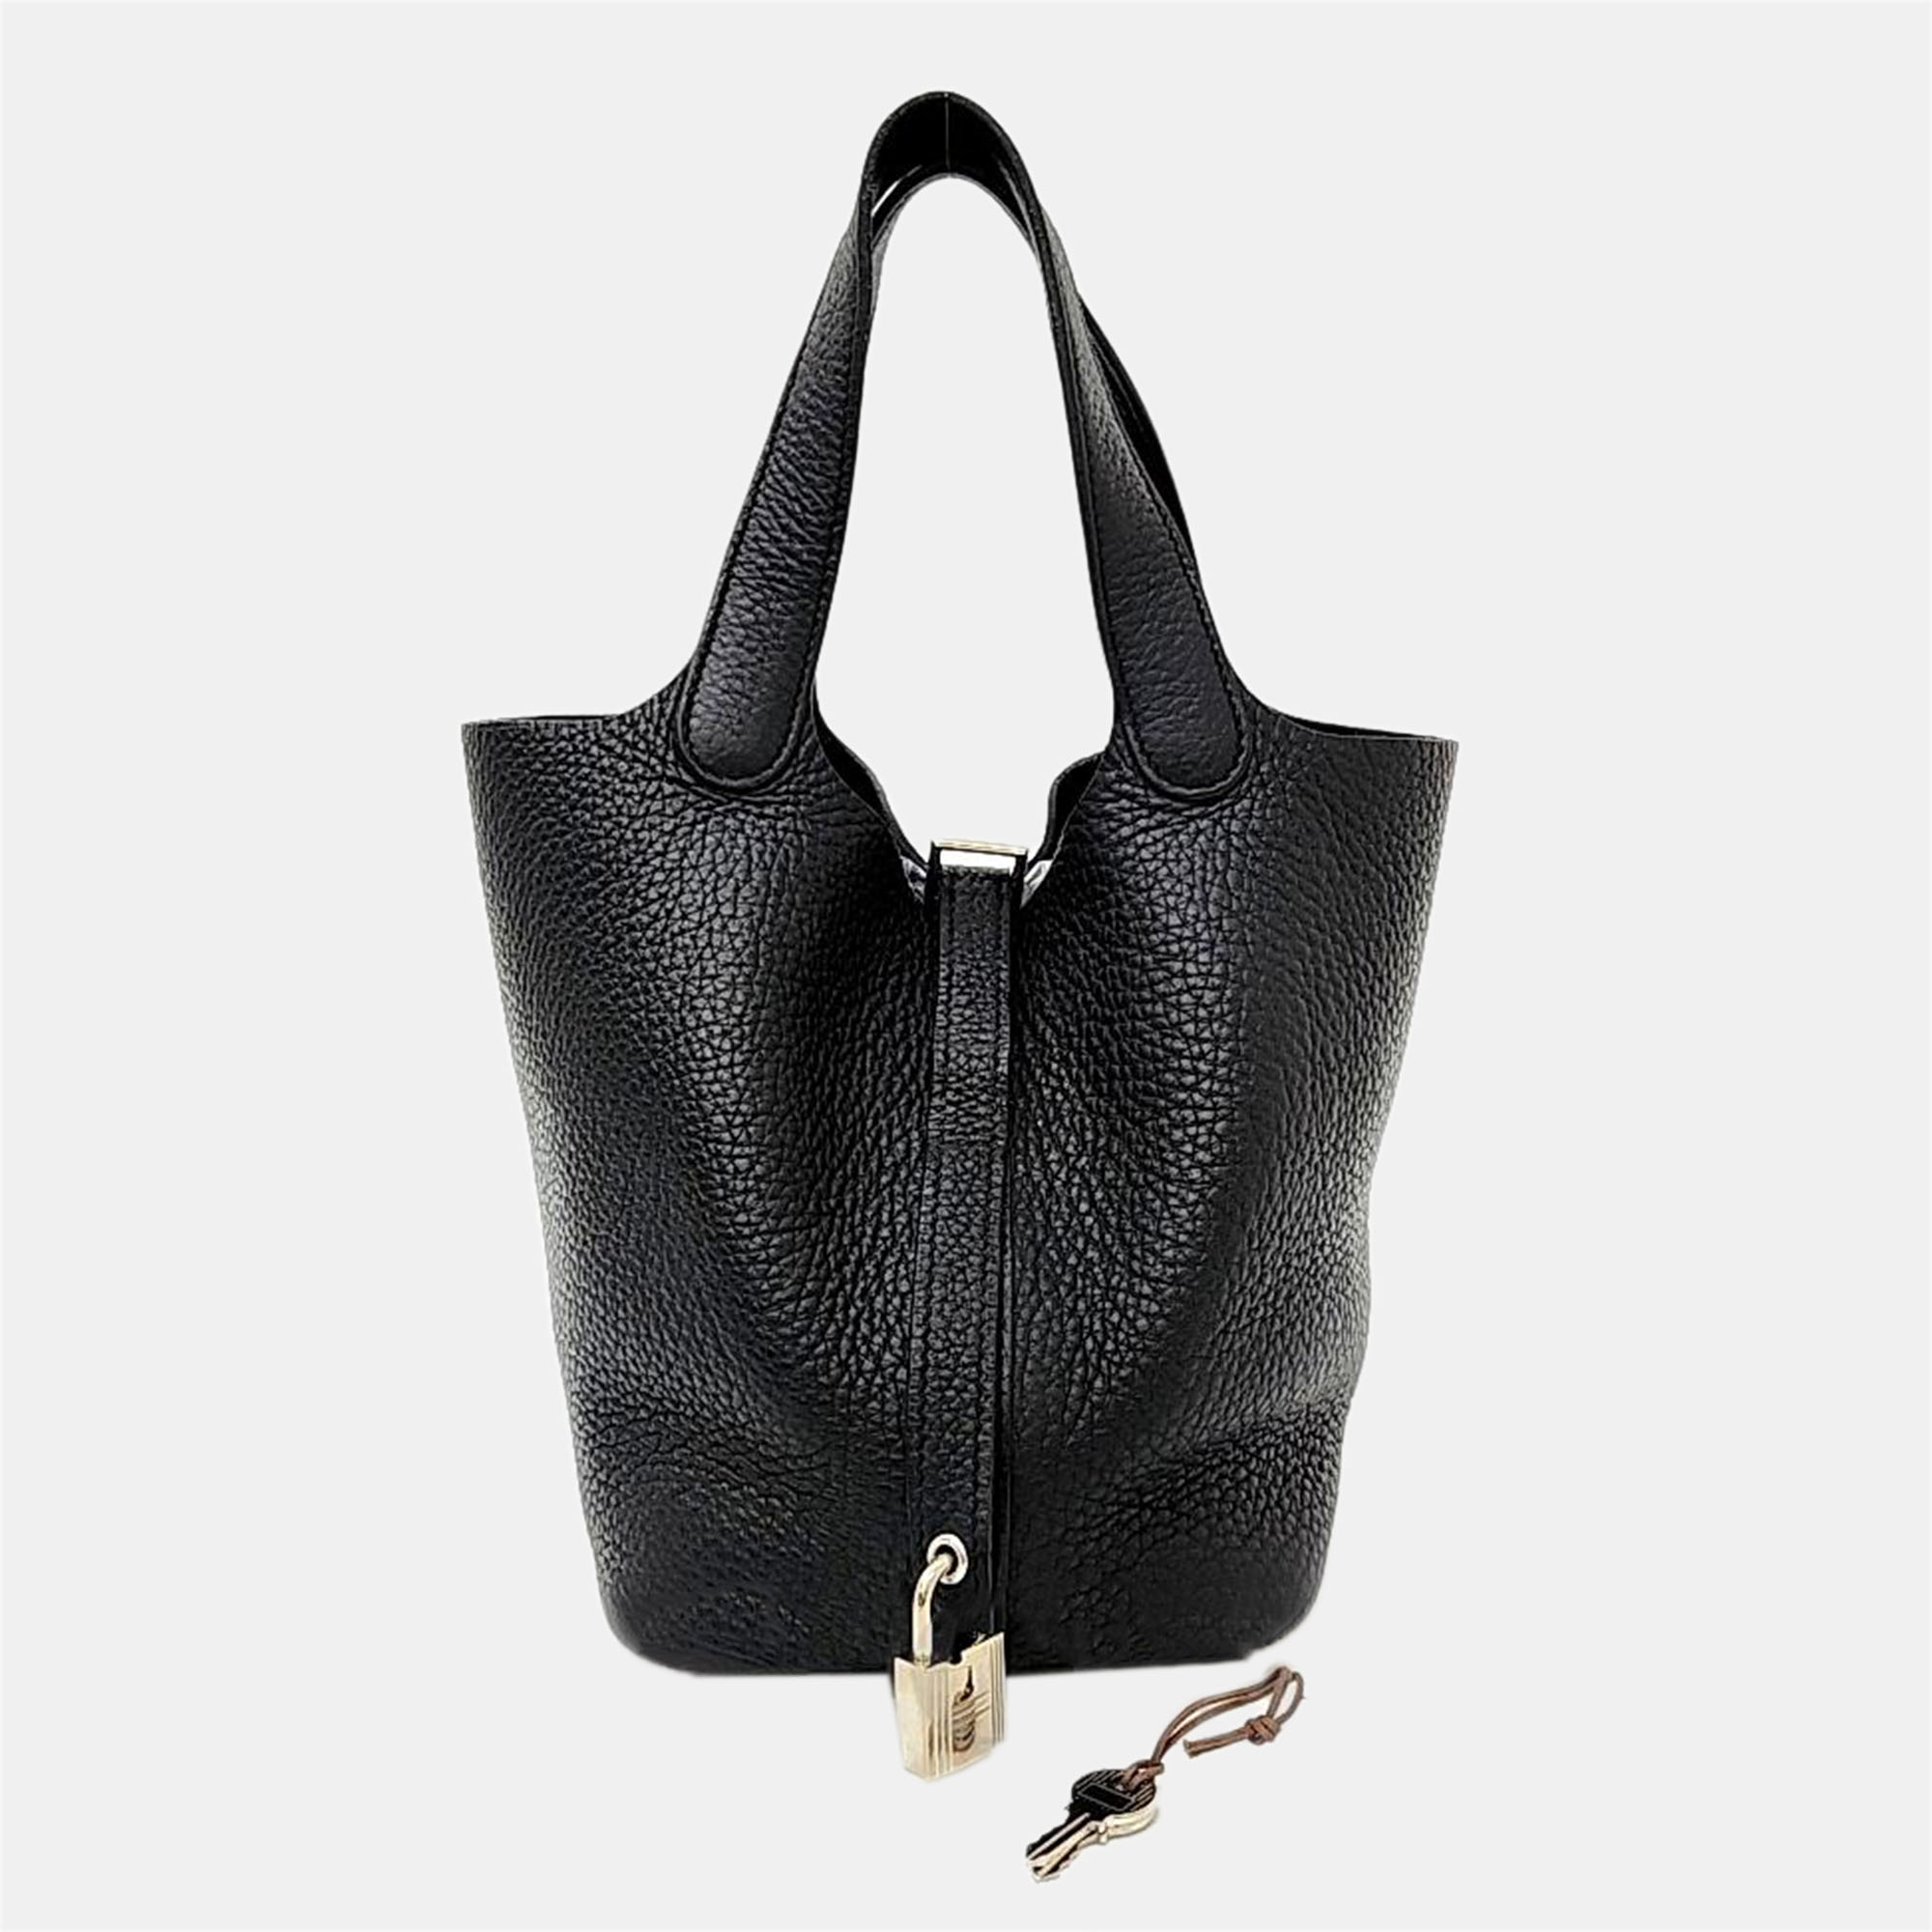 Hermes Black Clemence Leather Picotin Lock 18 Tote Bag